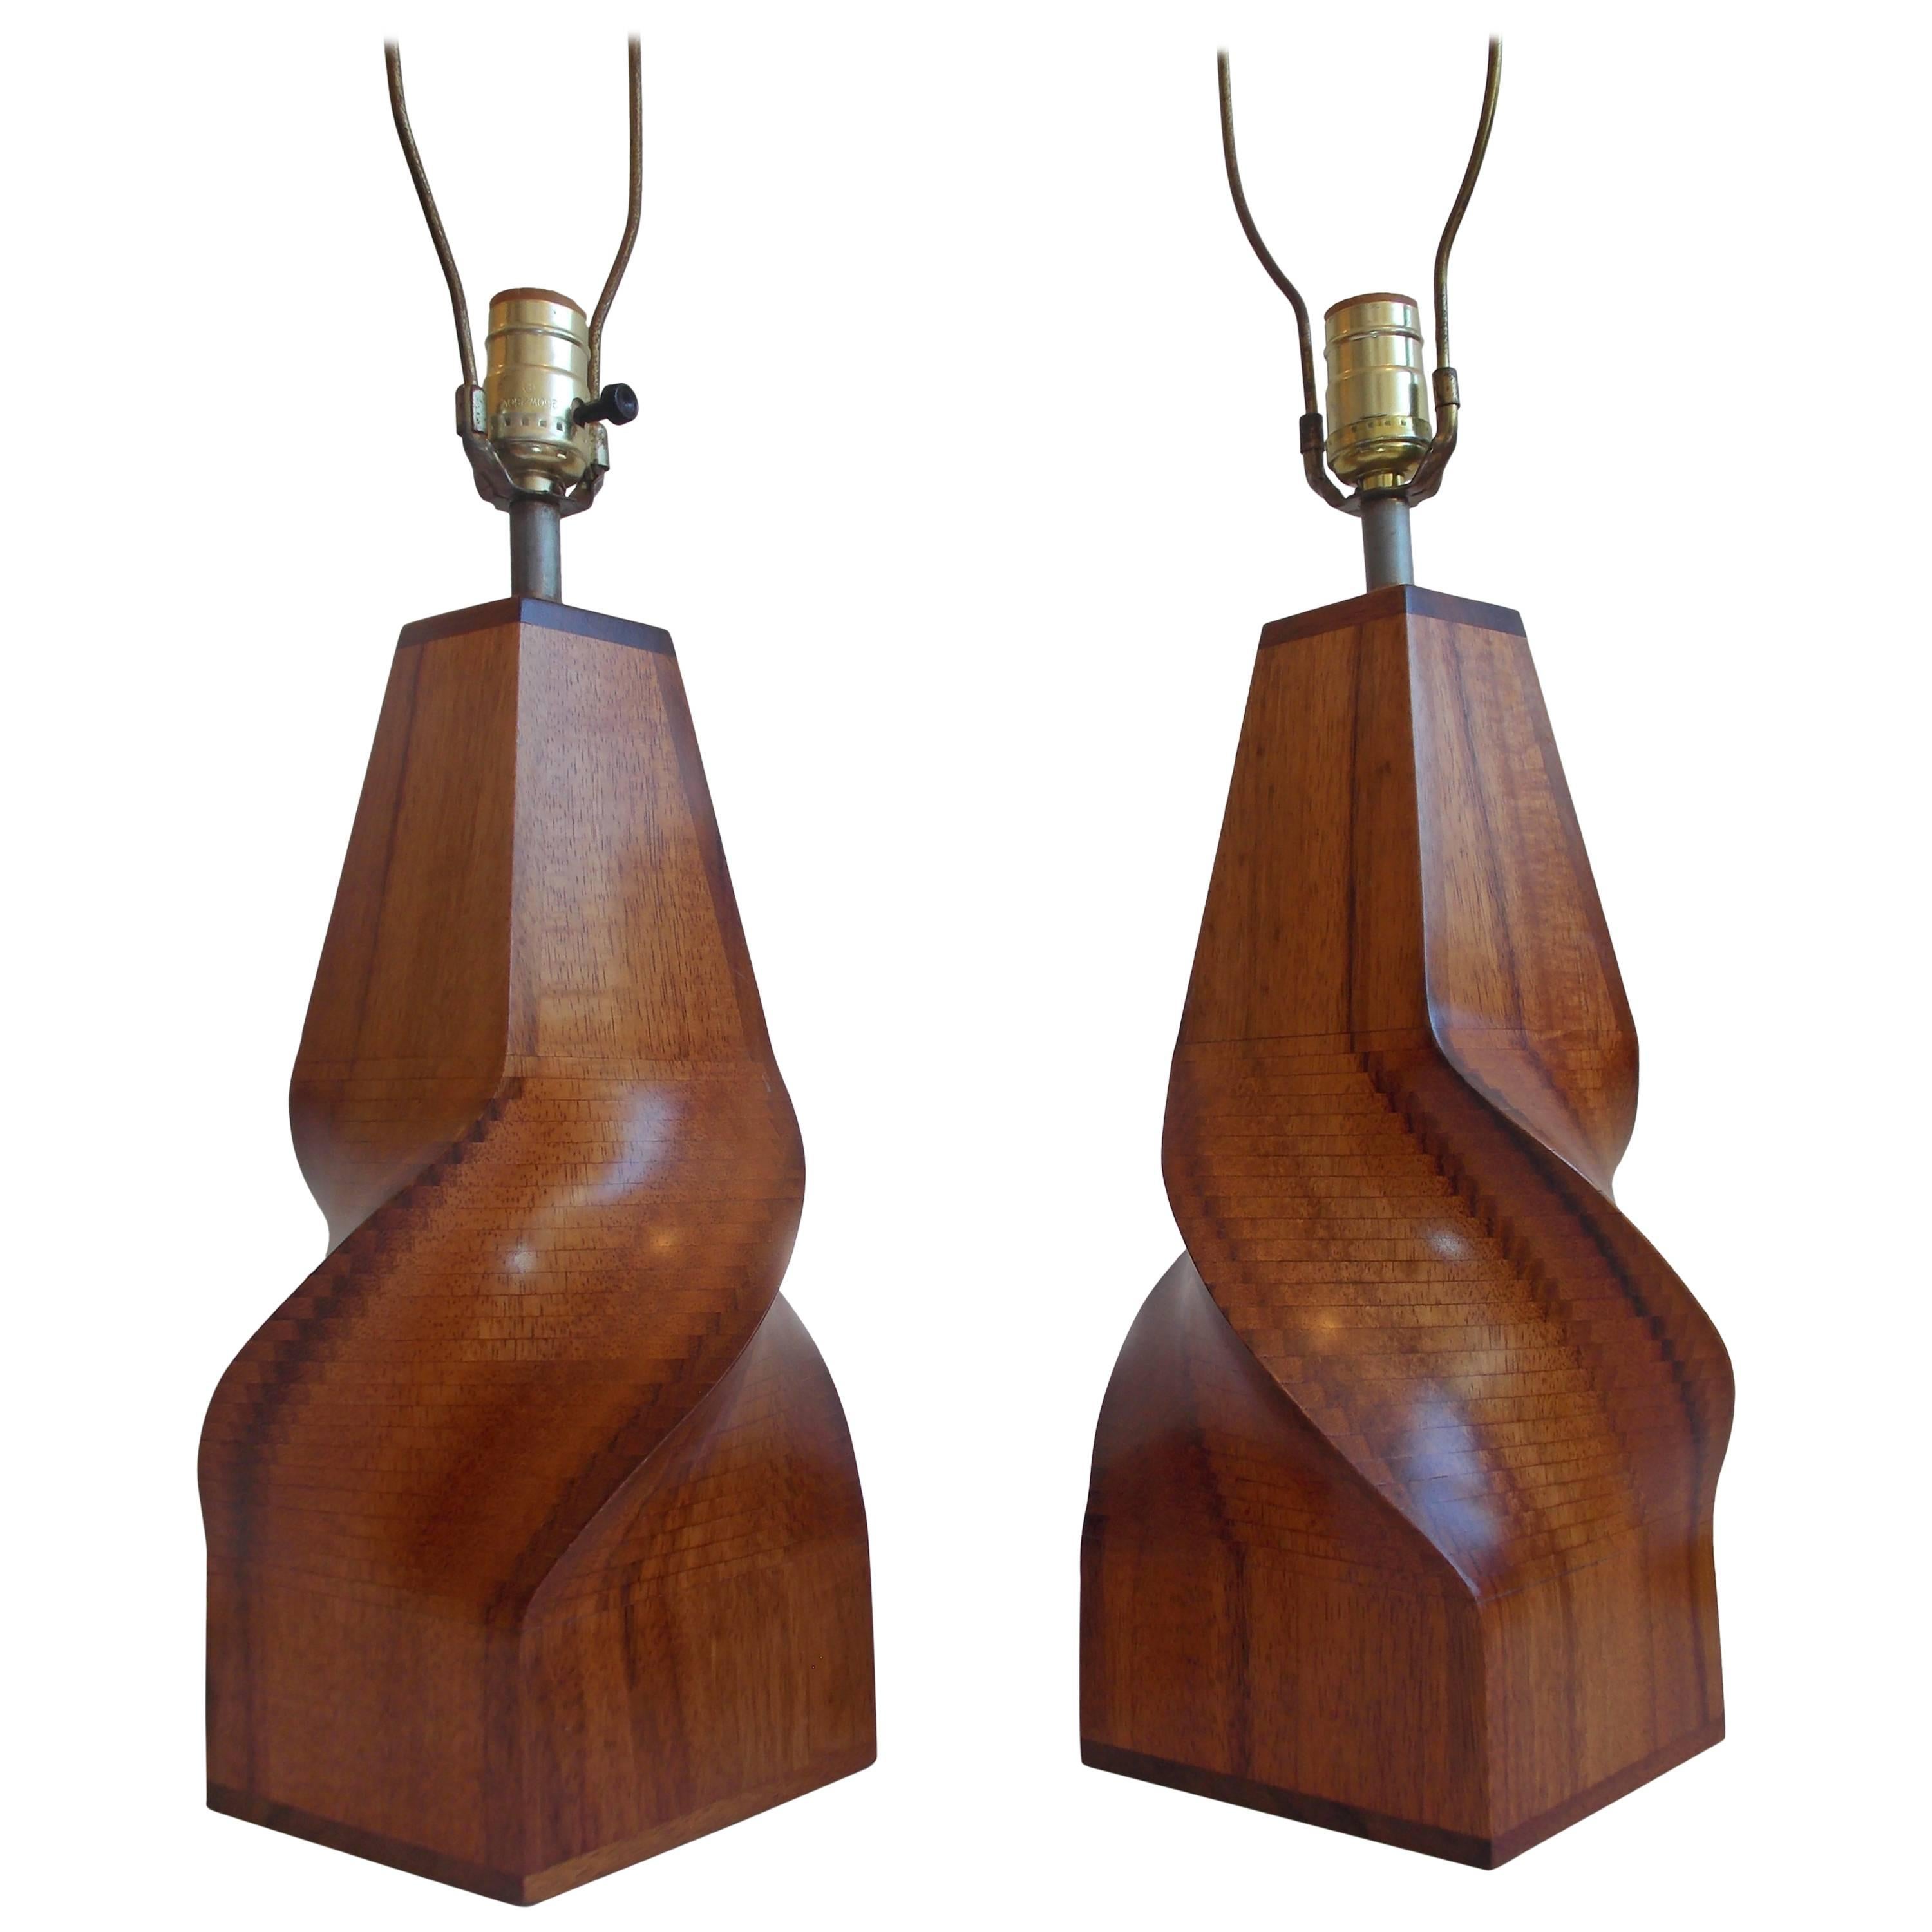 Studio Crafted Artisan Wood Lamps